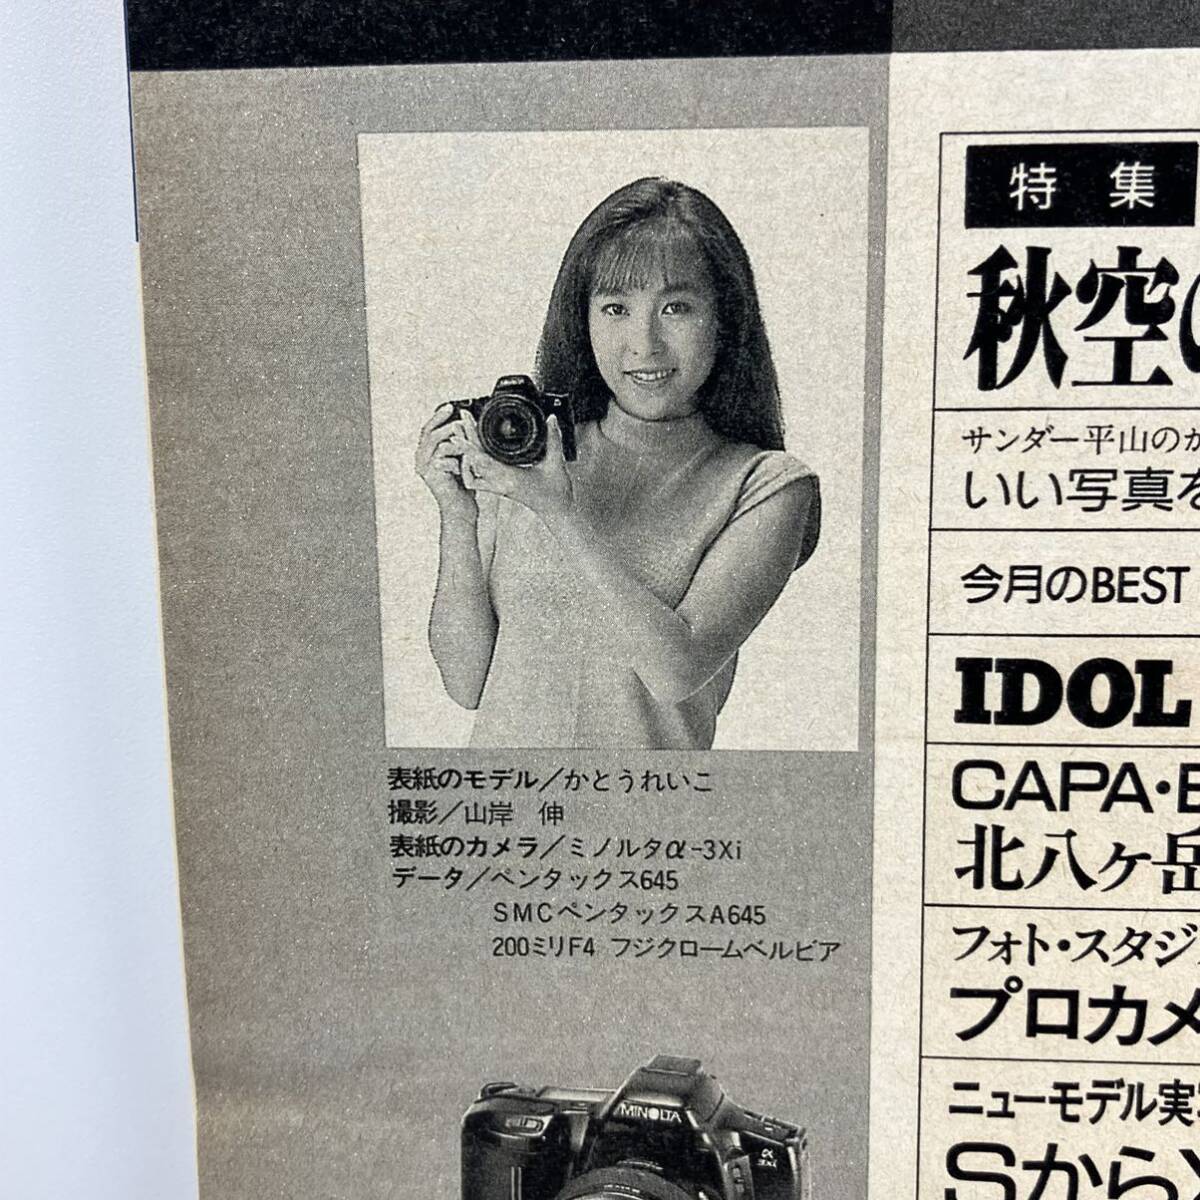 A0401[ used magazine ] Capa 1991 year 11 month number Kato Reiko 